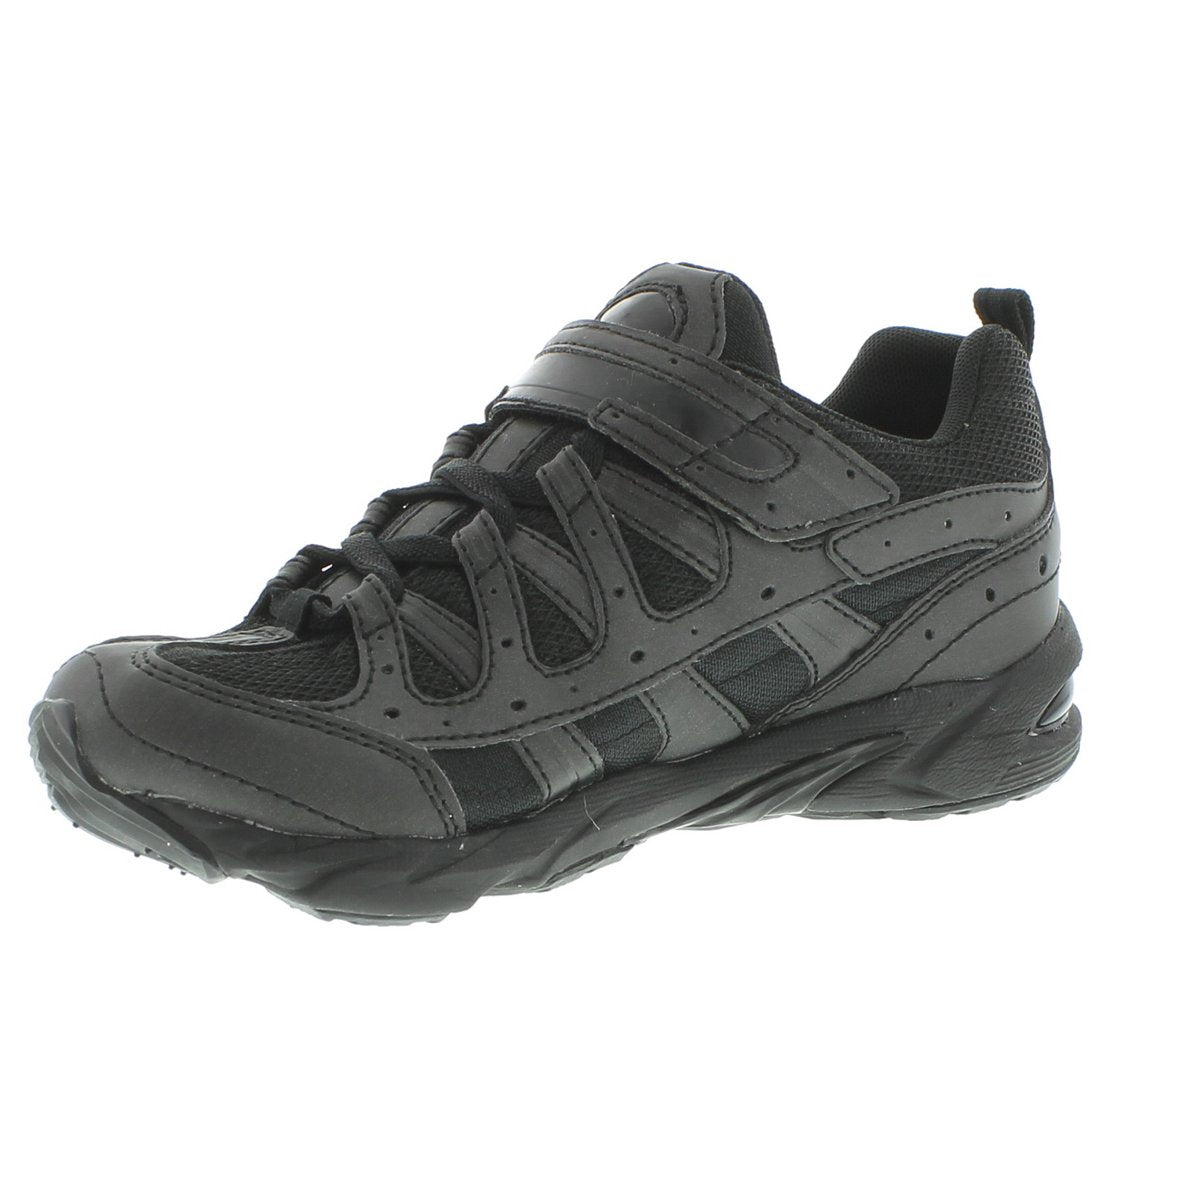 Youth Tsukihoshi Speed Sneaker in Black Noir from the front view